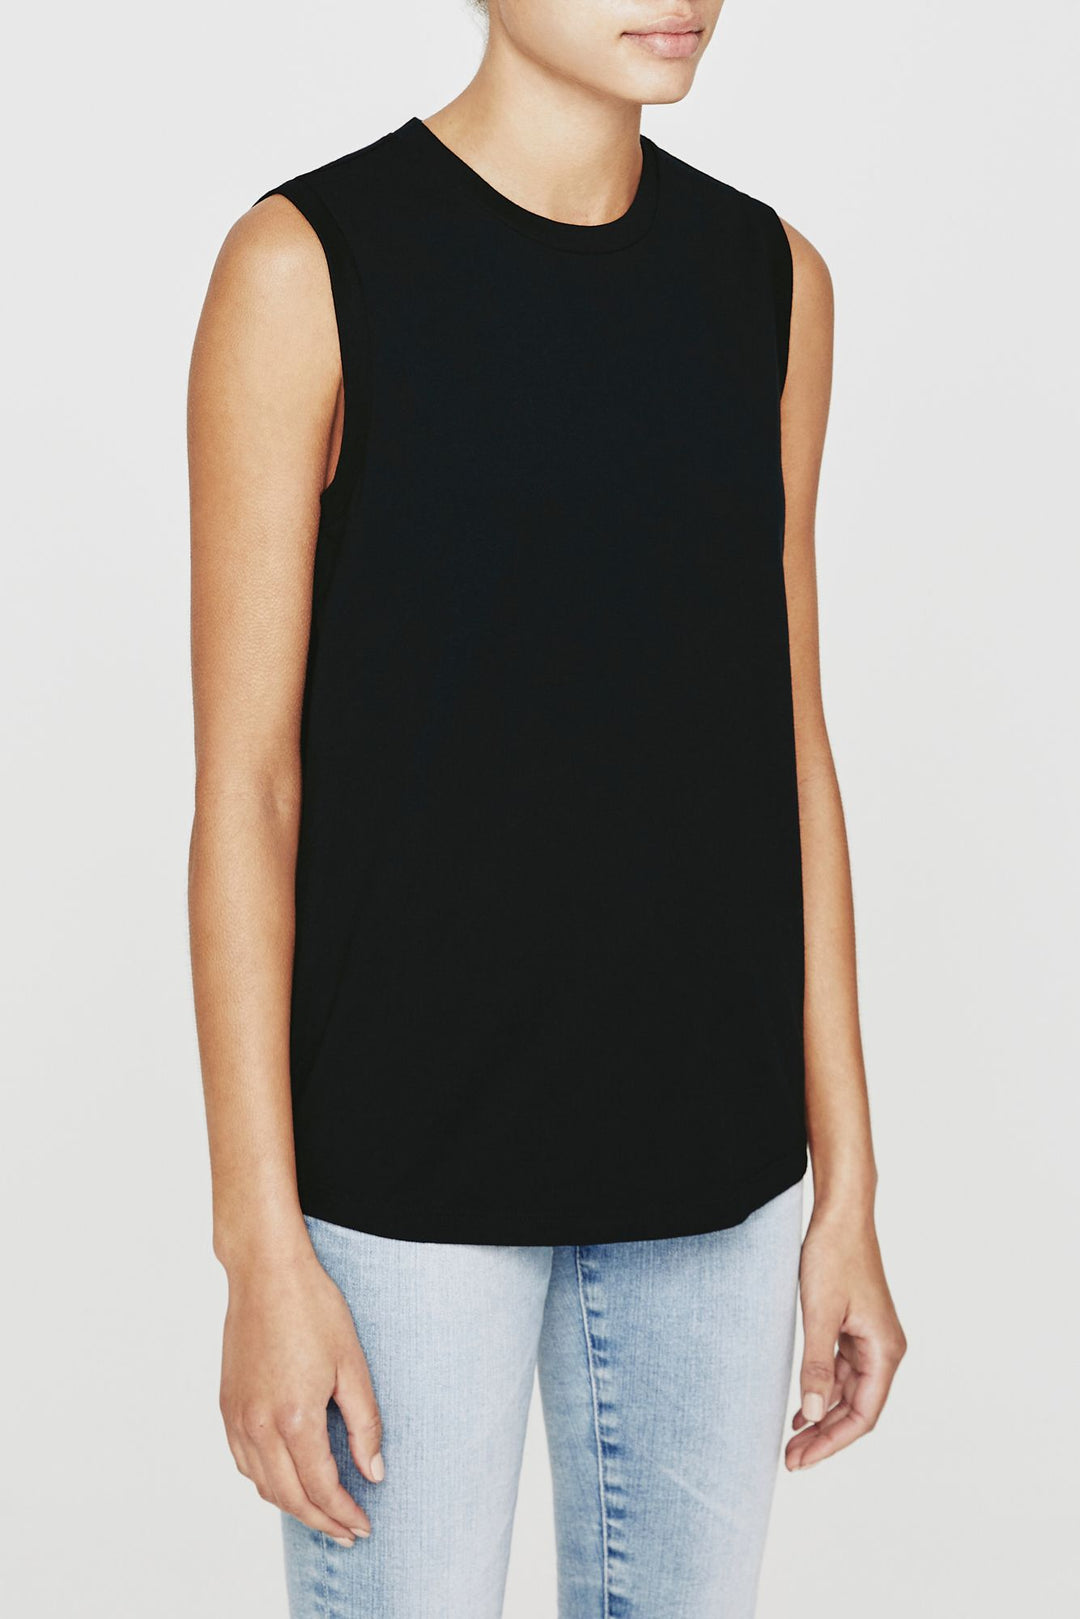 JAGGER MUSCLE TANK - Kingfisher Road - Online Boutique